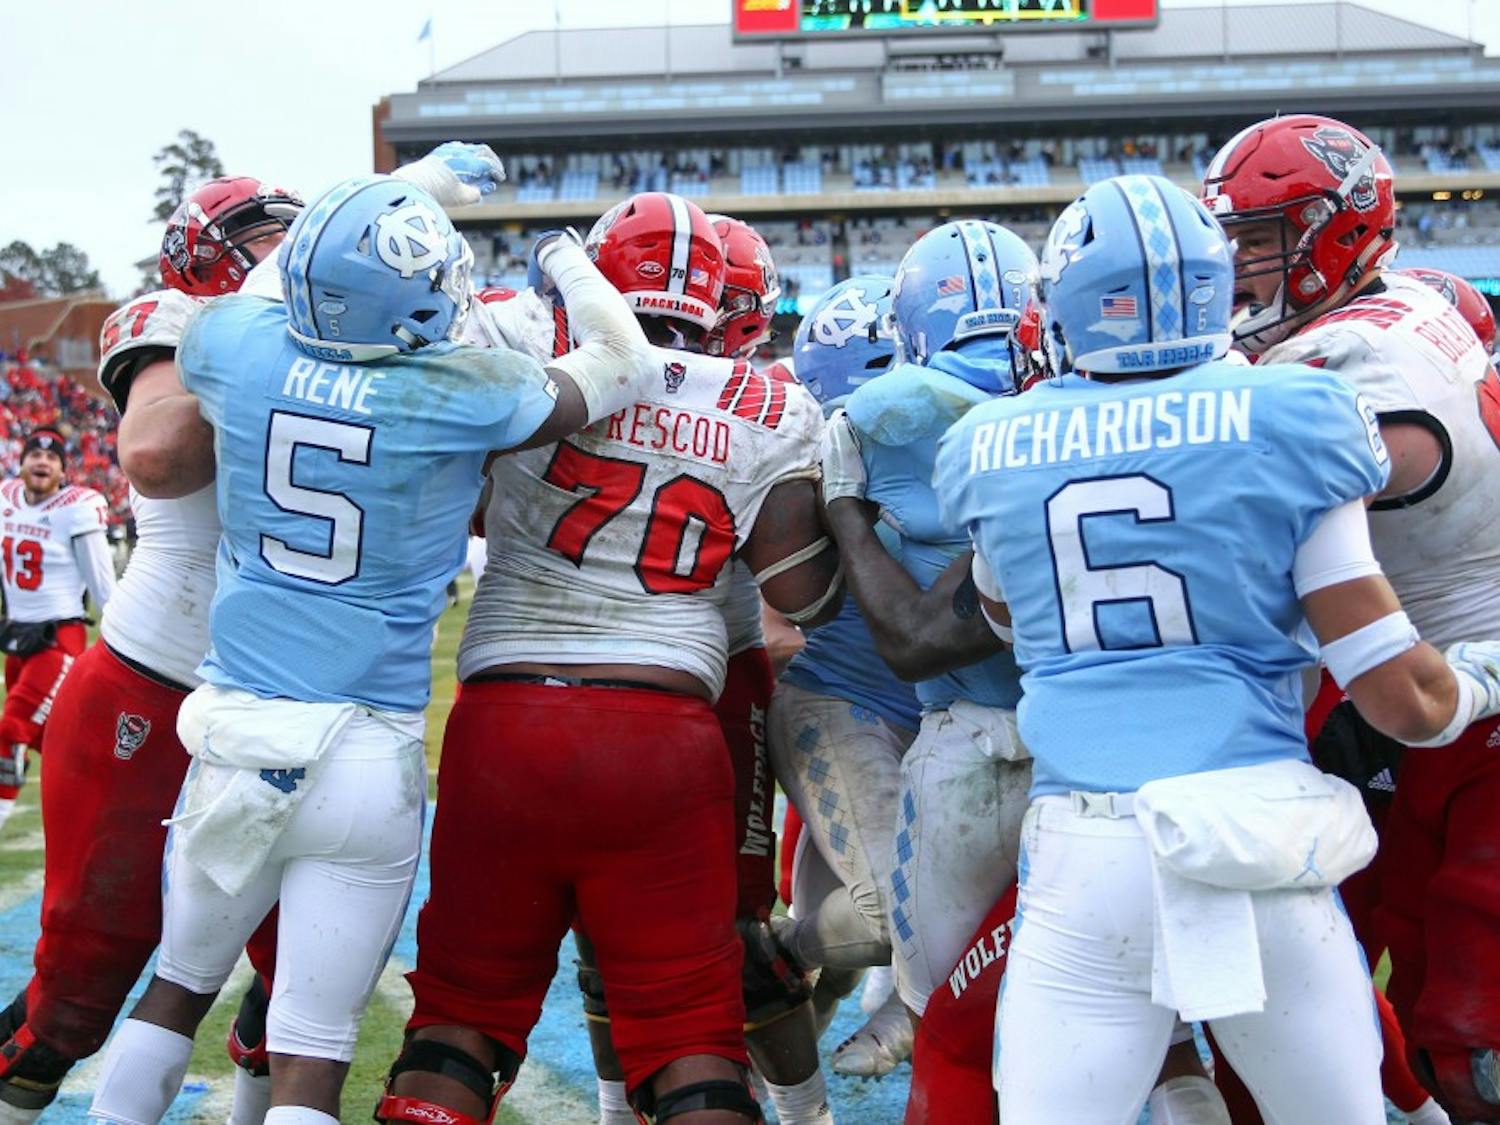 UNC and NC State players fight in a post-game brawl on Saturday, Nov. 24 in Kenan Memorial Stadium. NC State beat UNC 34-28 in overtime.